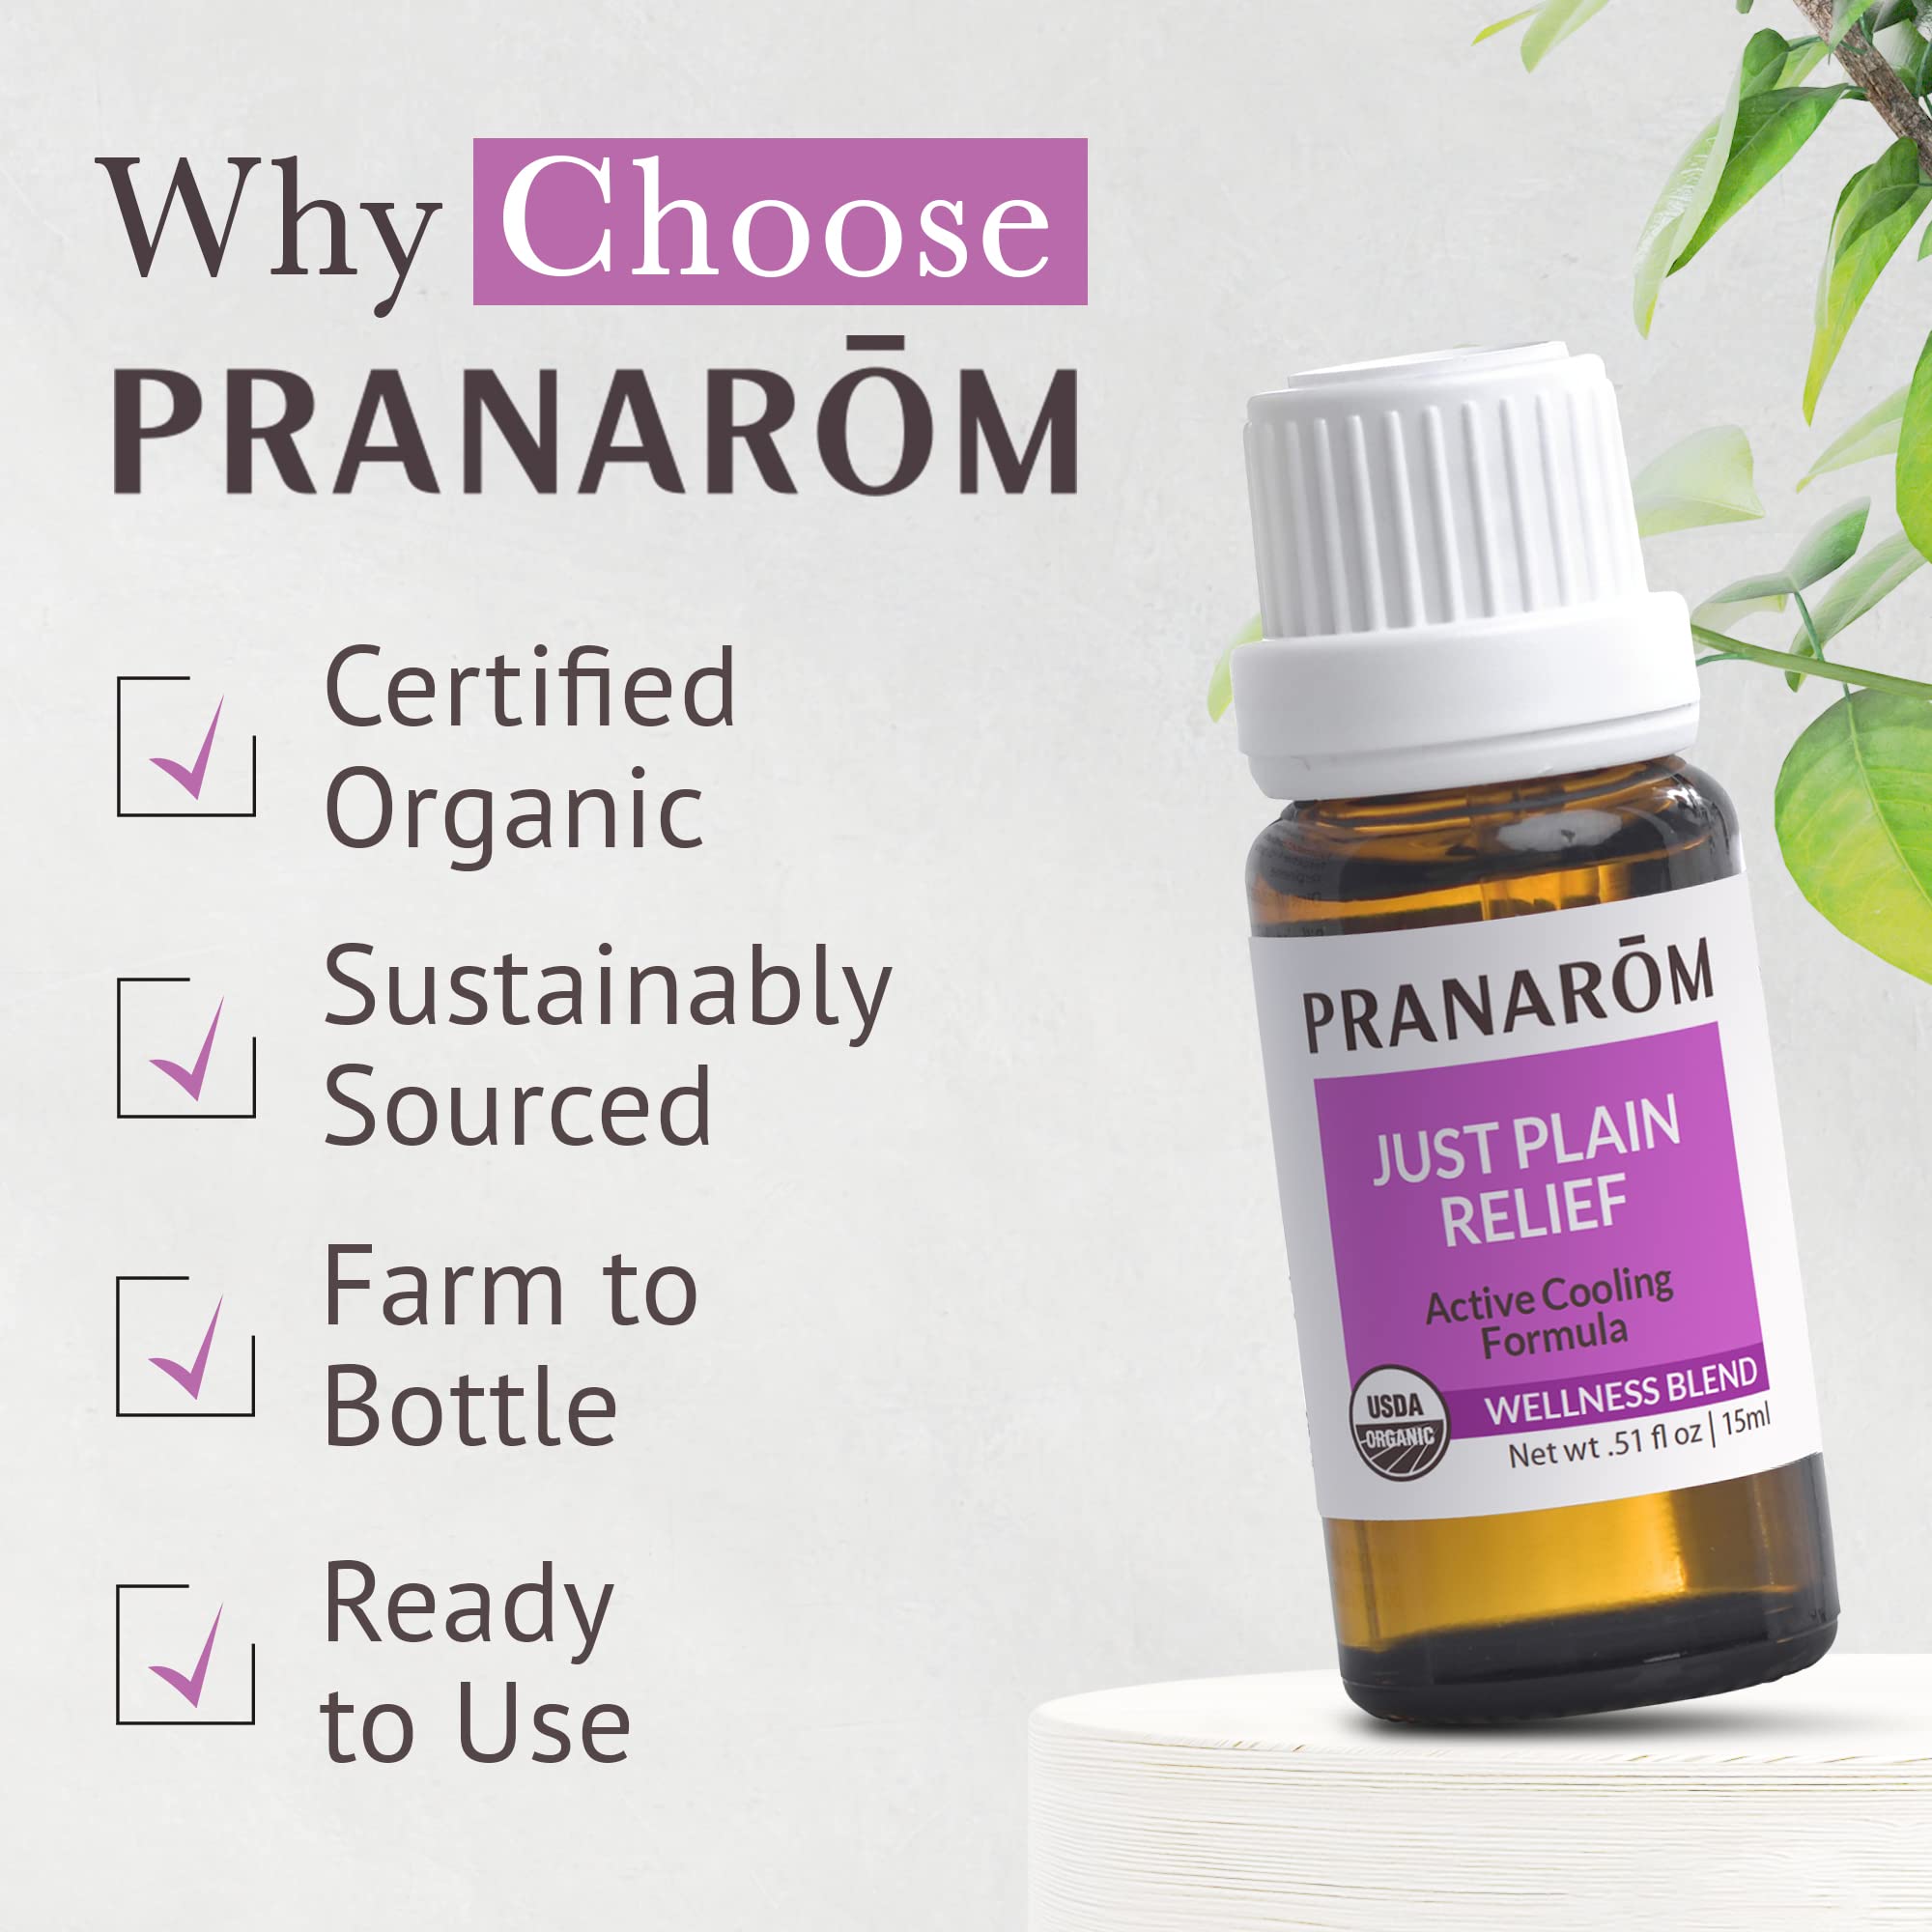 Pranarom - Just Plain Relief Essential Oils For Diffuser, Essential Oils For Humidifiers, Organic Essential Oils for Home, Natural Essential Oils for Skin Care, Certified Organic, 15ml